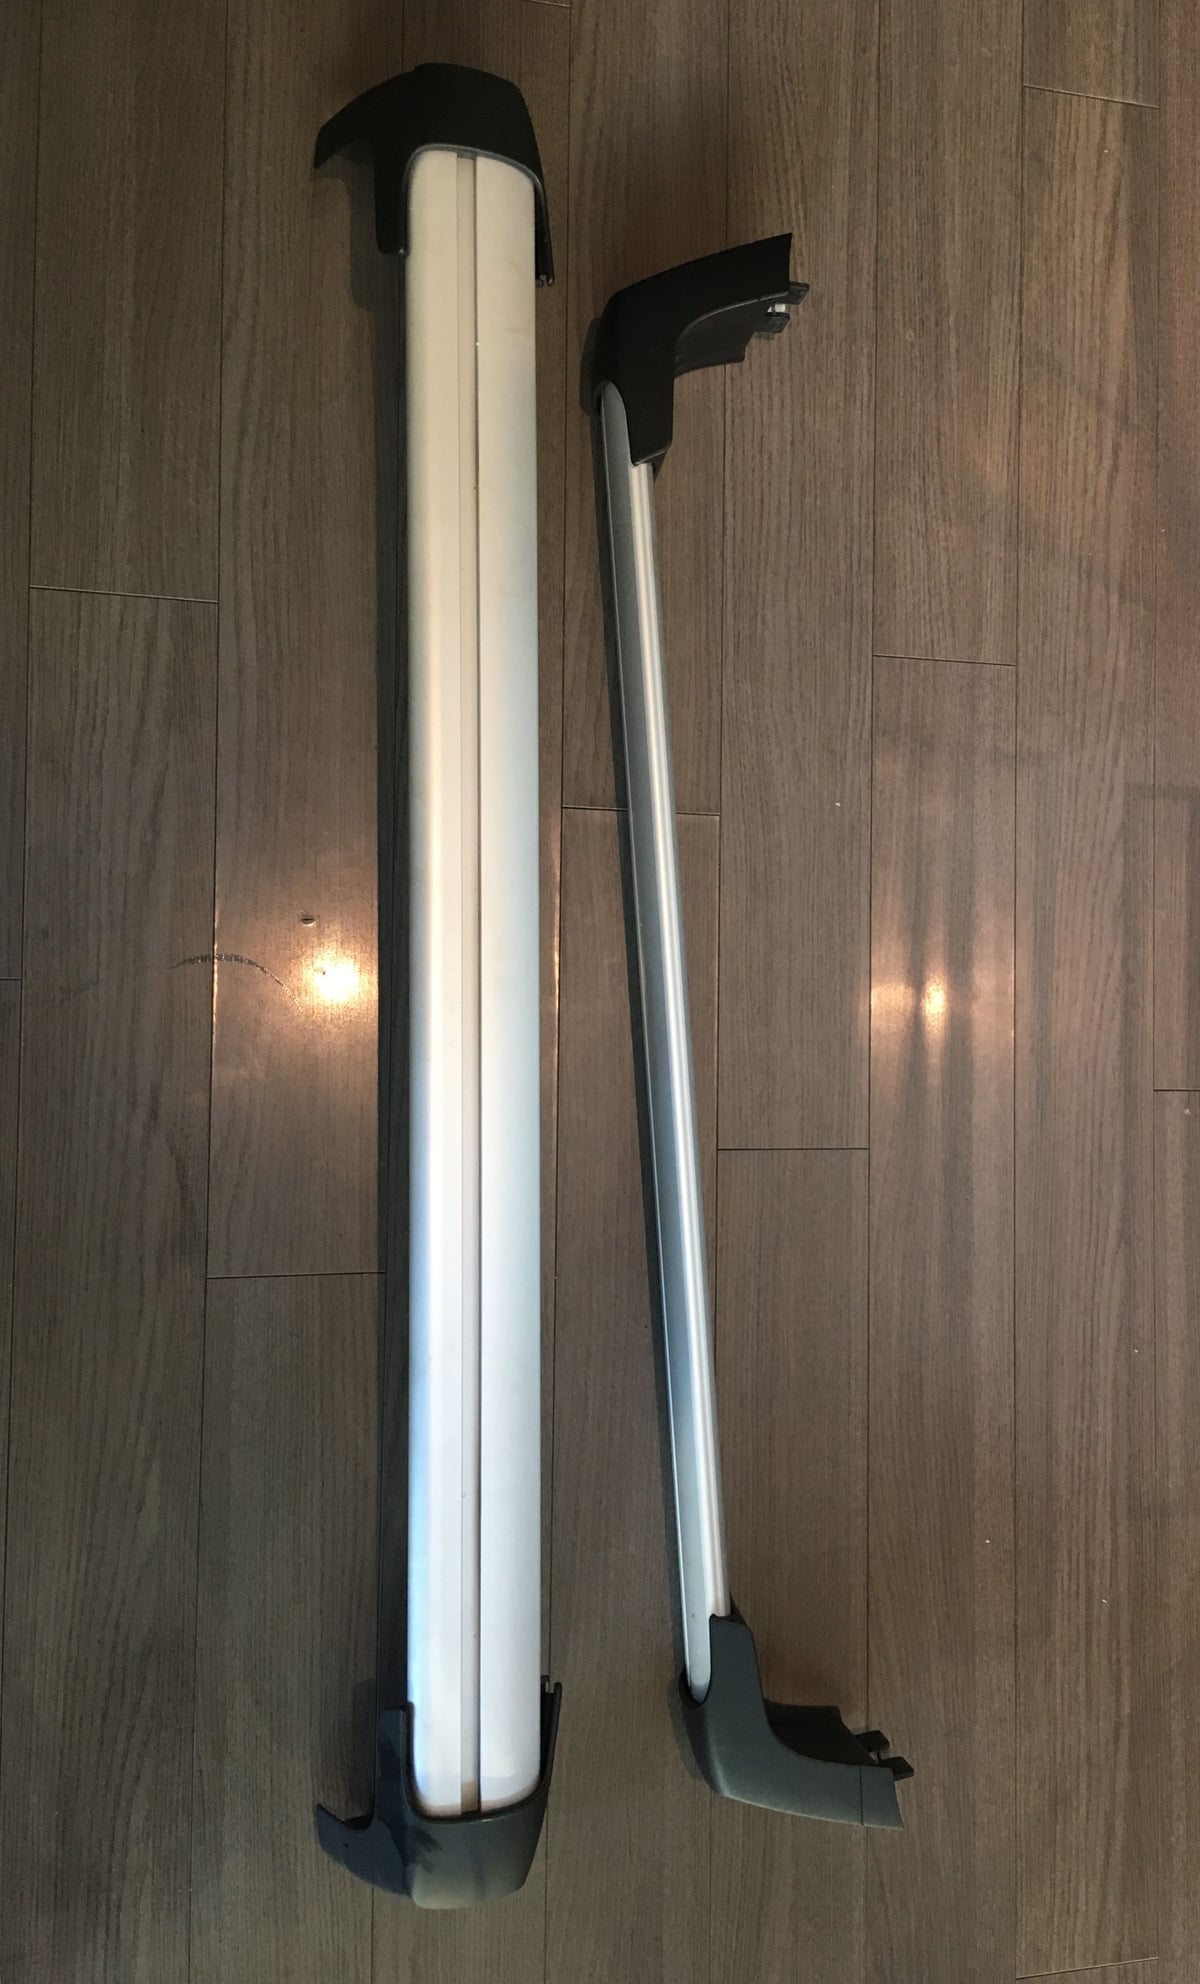 Accessories - Mercedes Roof Rails - Used - 2015 to 2018 Mercedes-Benz C300 - Vancouver, BC V6E4R2, Canada